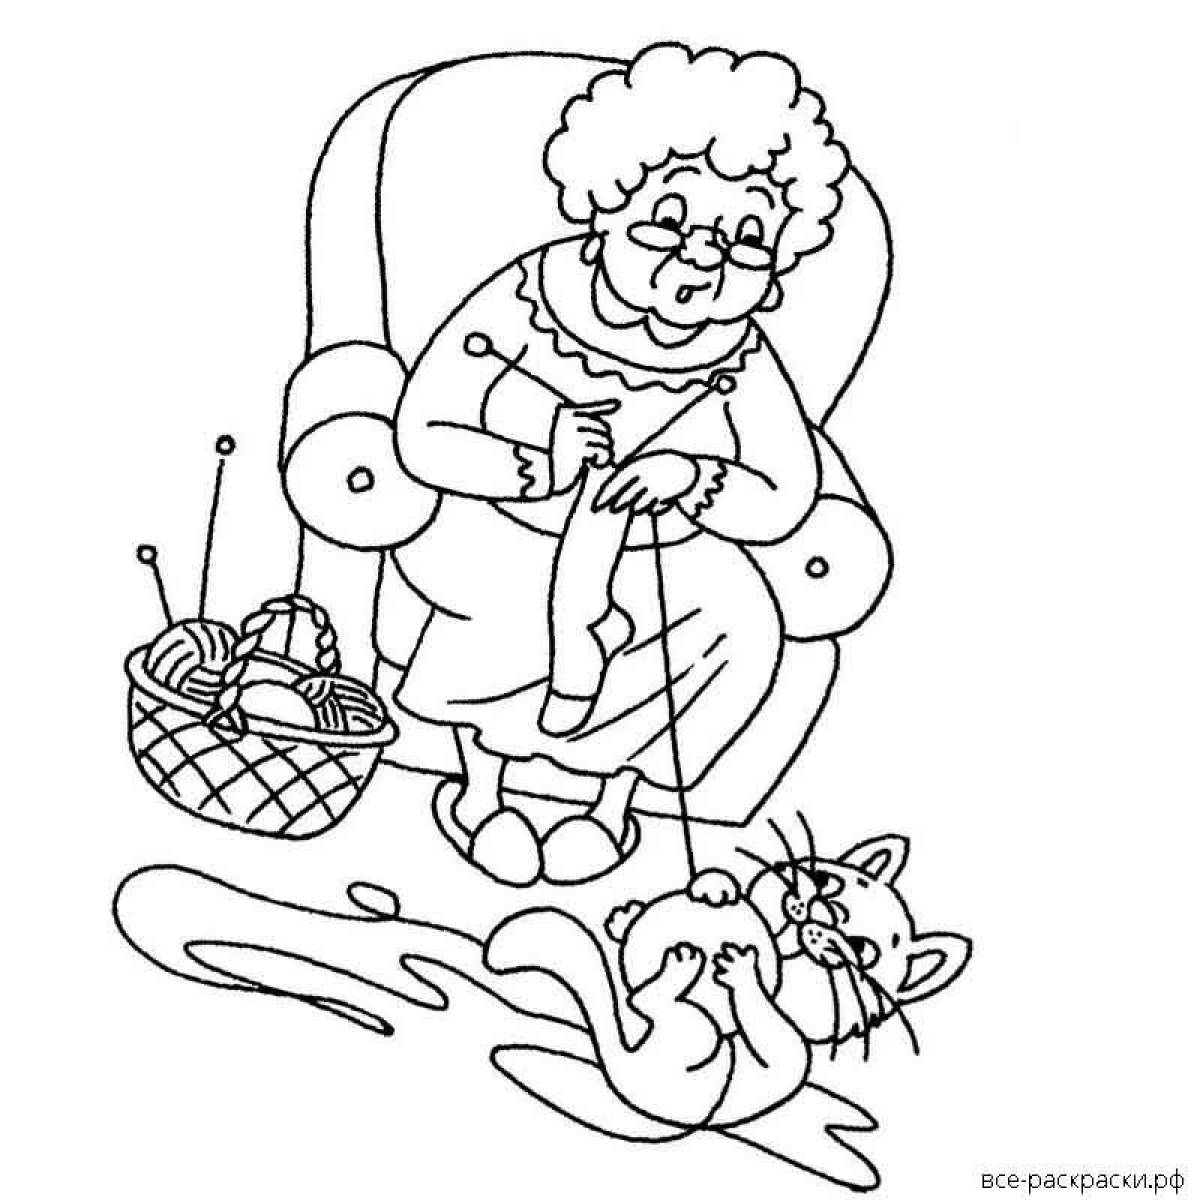 Glorious granny happy birthday coloring page